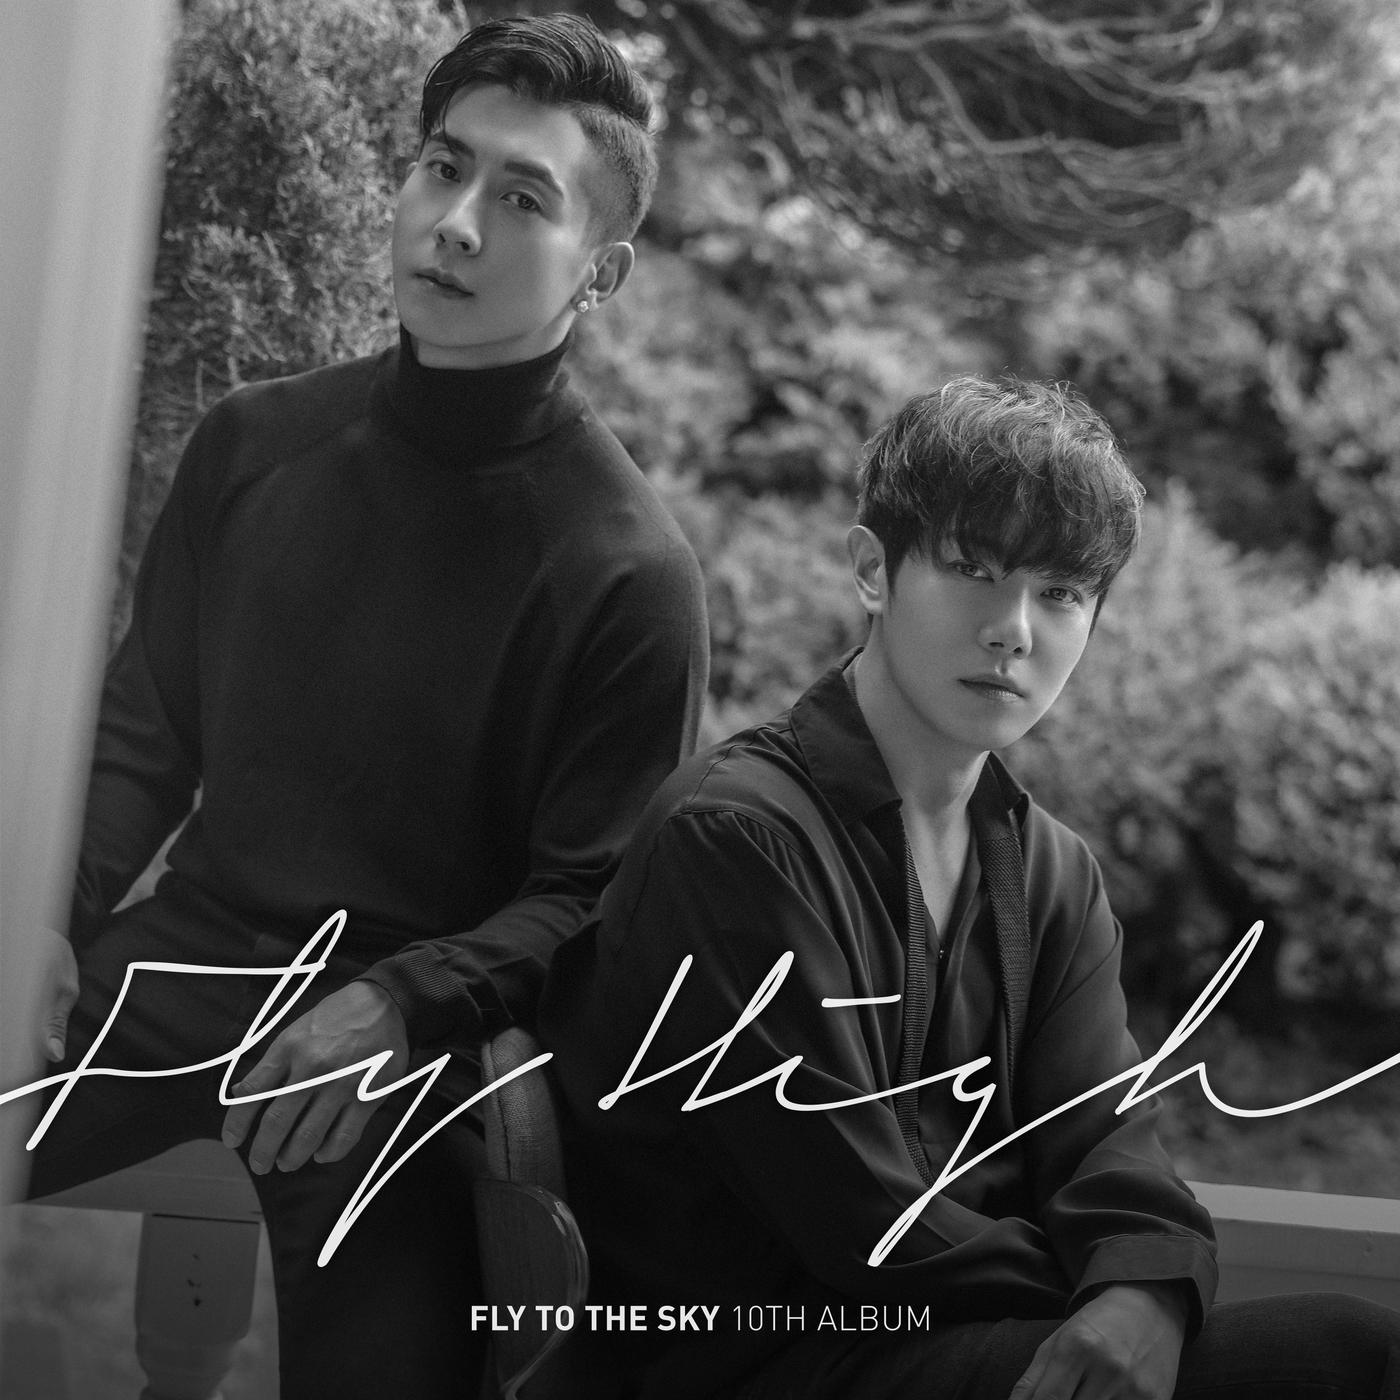 FLY TO THE SKY 10TH ALBUM